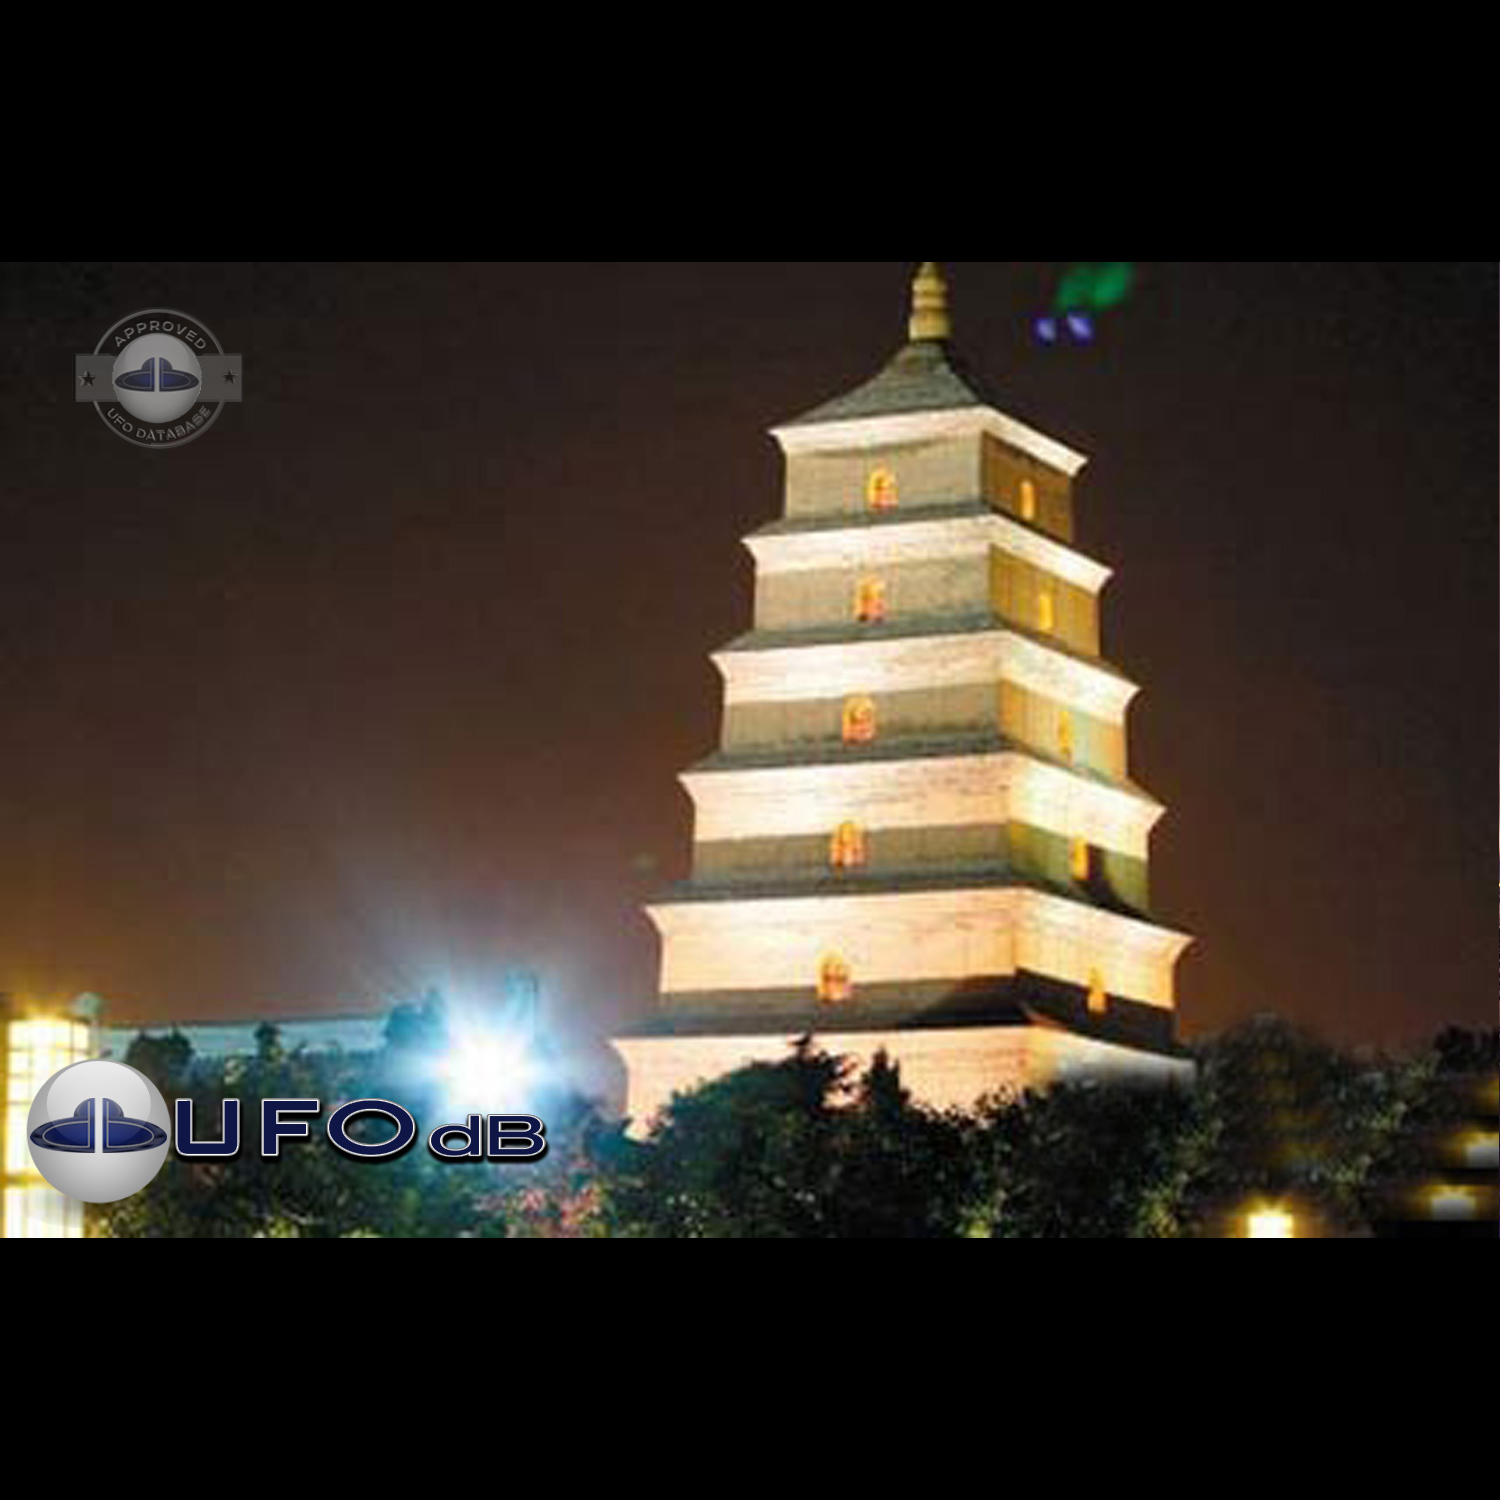 Purple glowing UFO over Giant Wild Goose Pagoda temple | China | 2009 UFO Picture #219-1